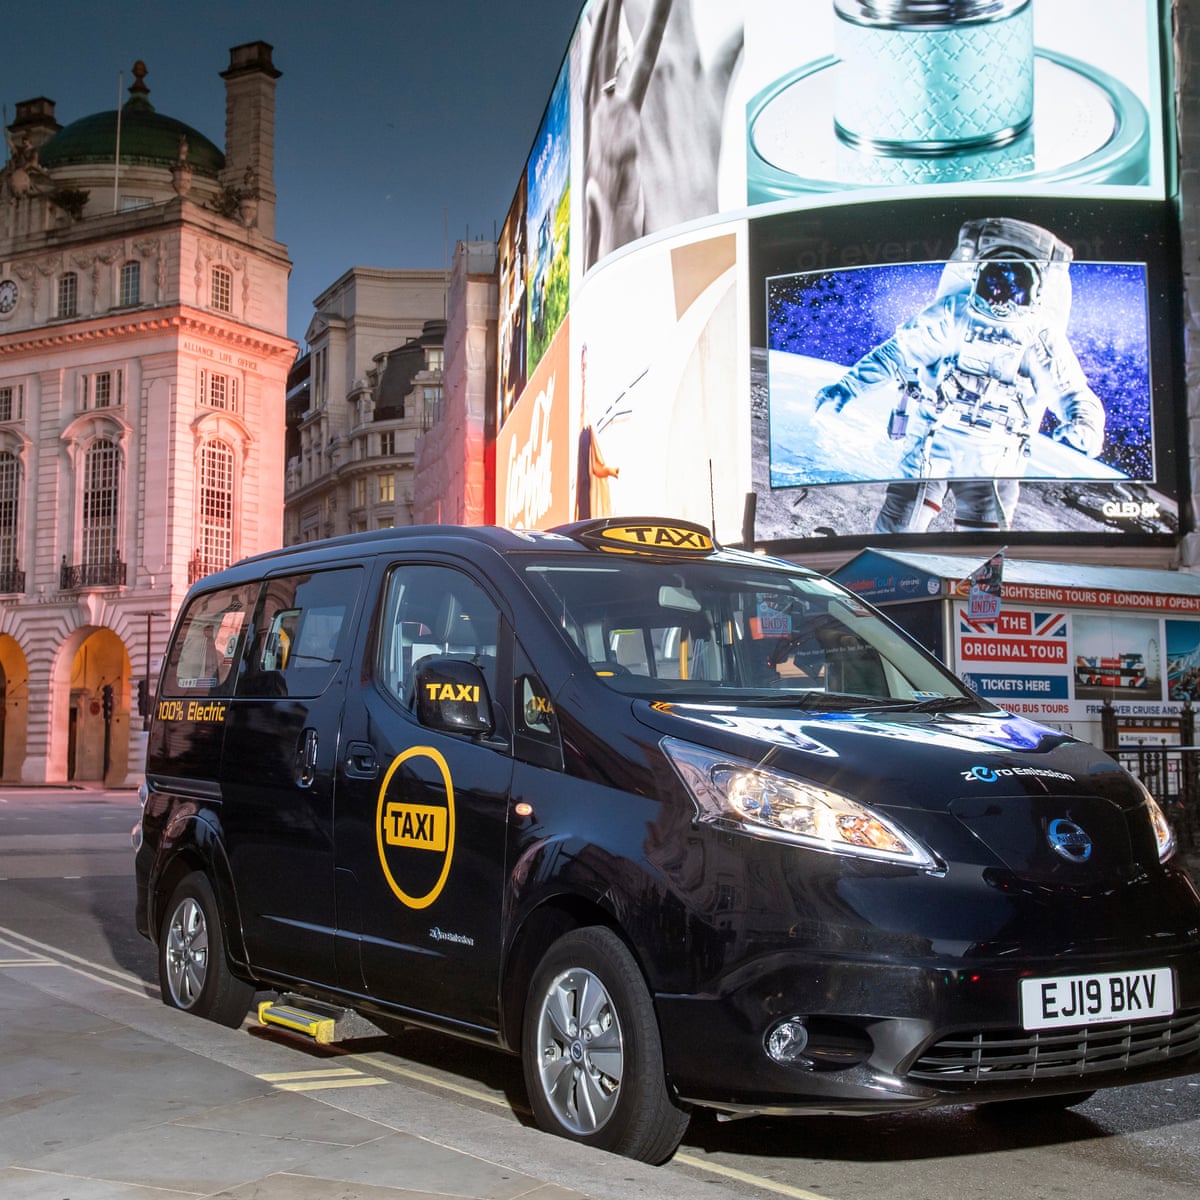 Electric Taxis Around the World